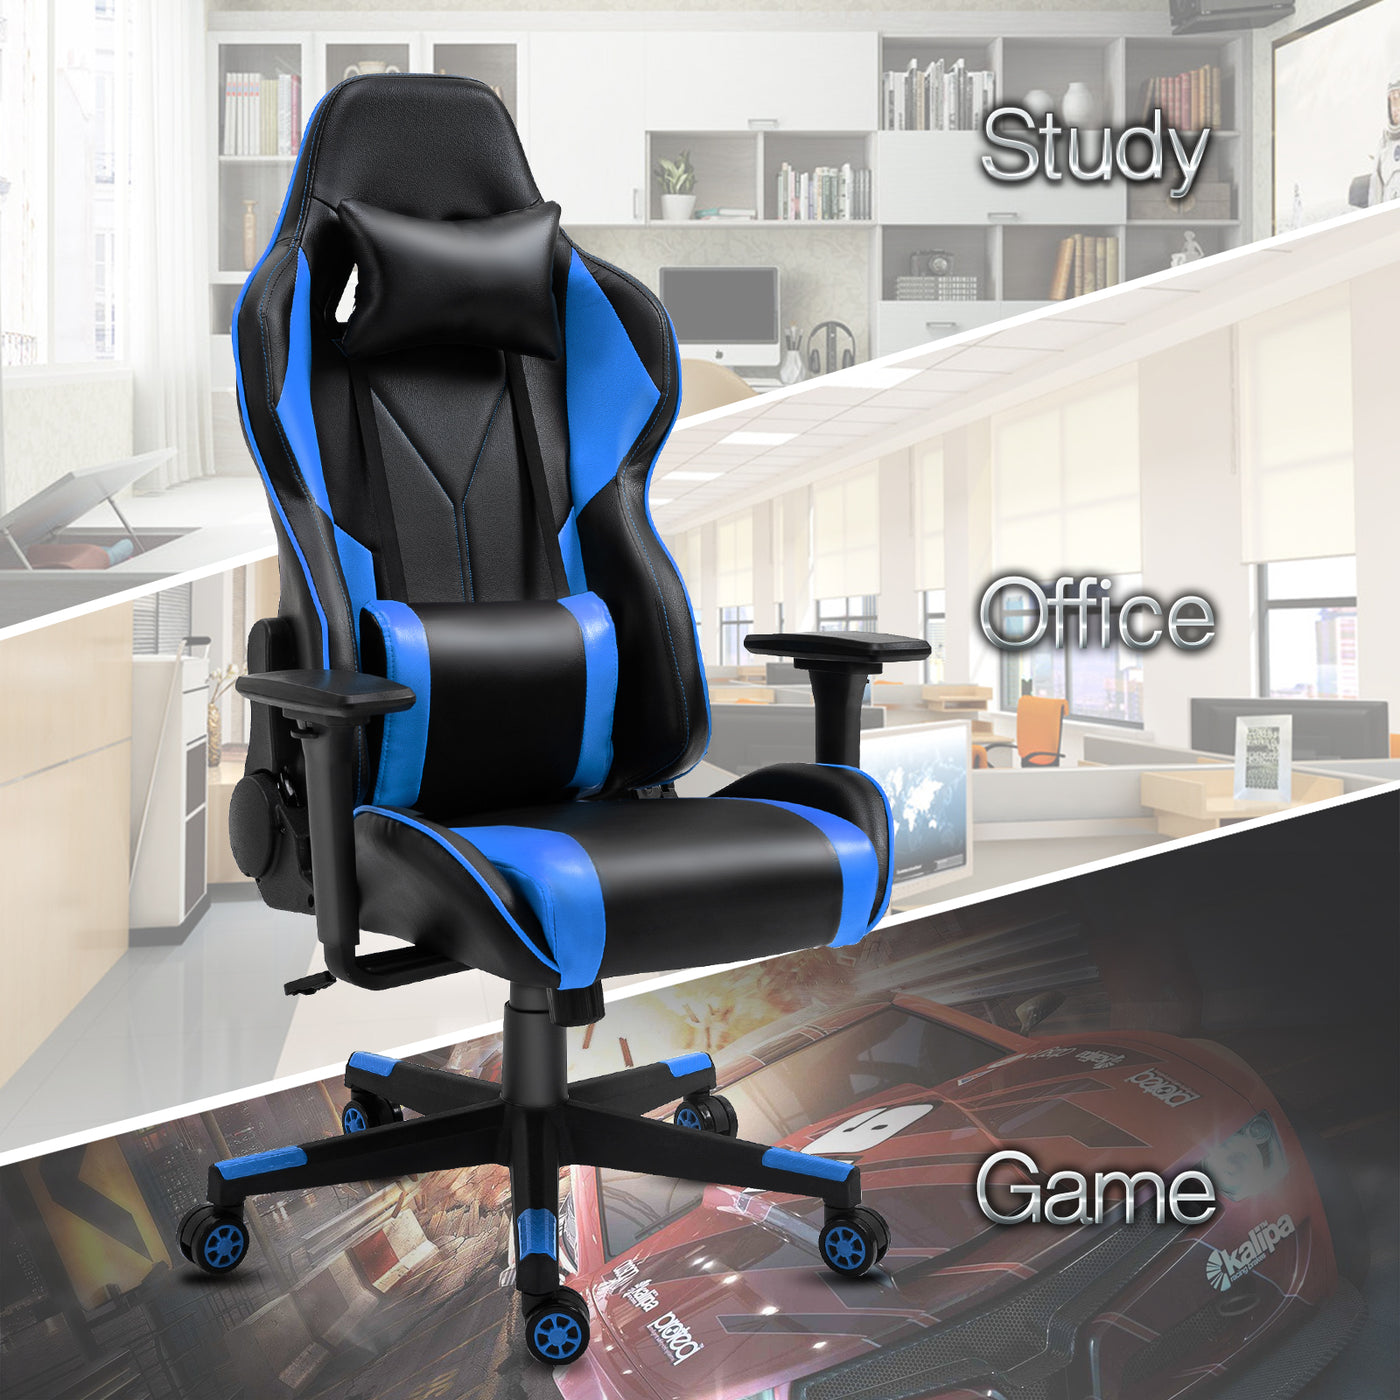 Racing Gaming Chairs Ergonomic Office Computer High Back Chairs Swivel Recliner